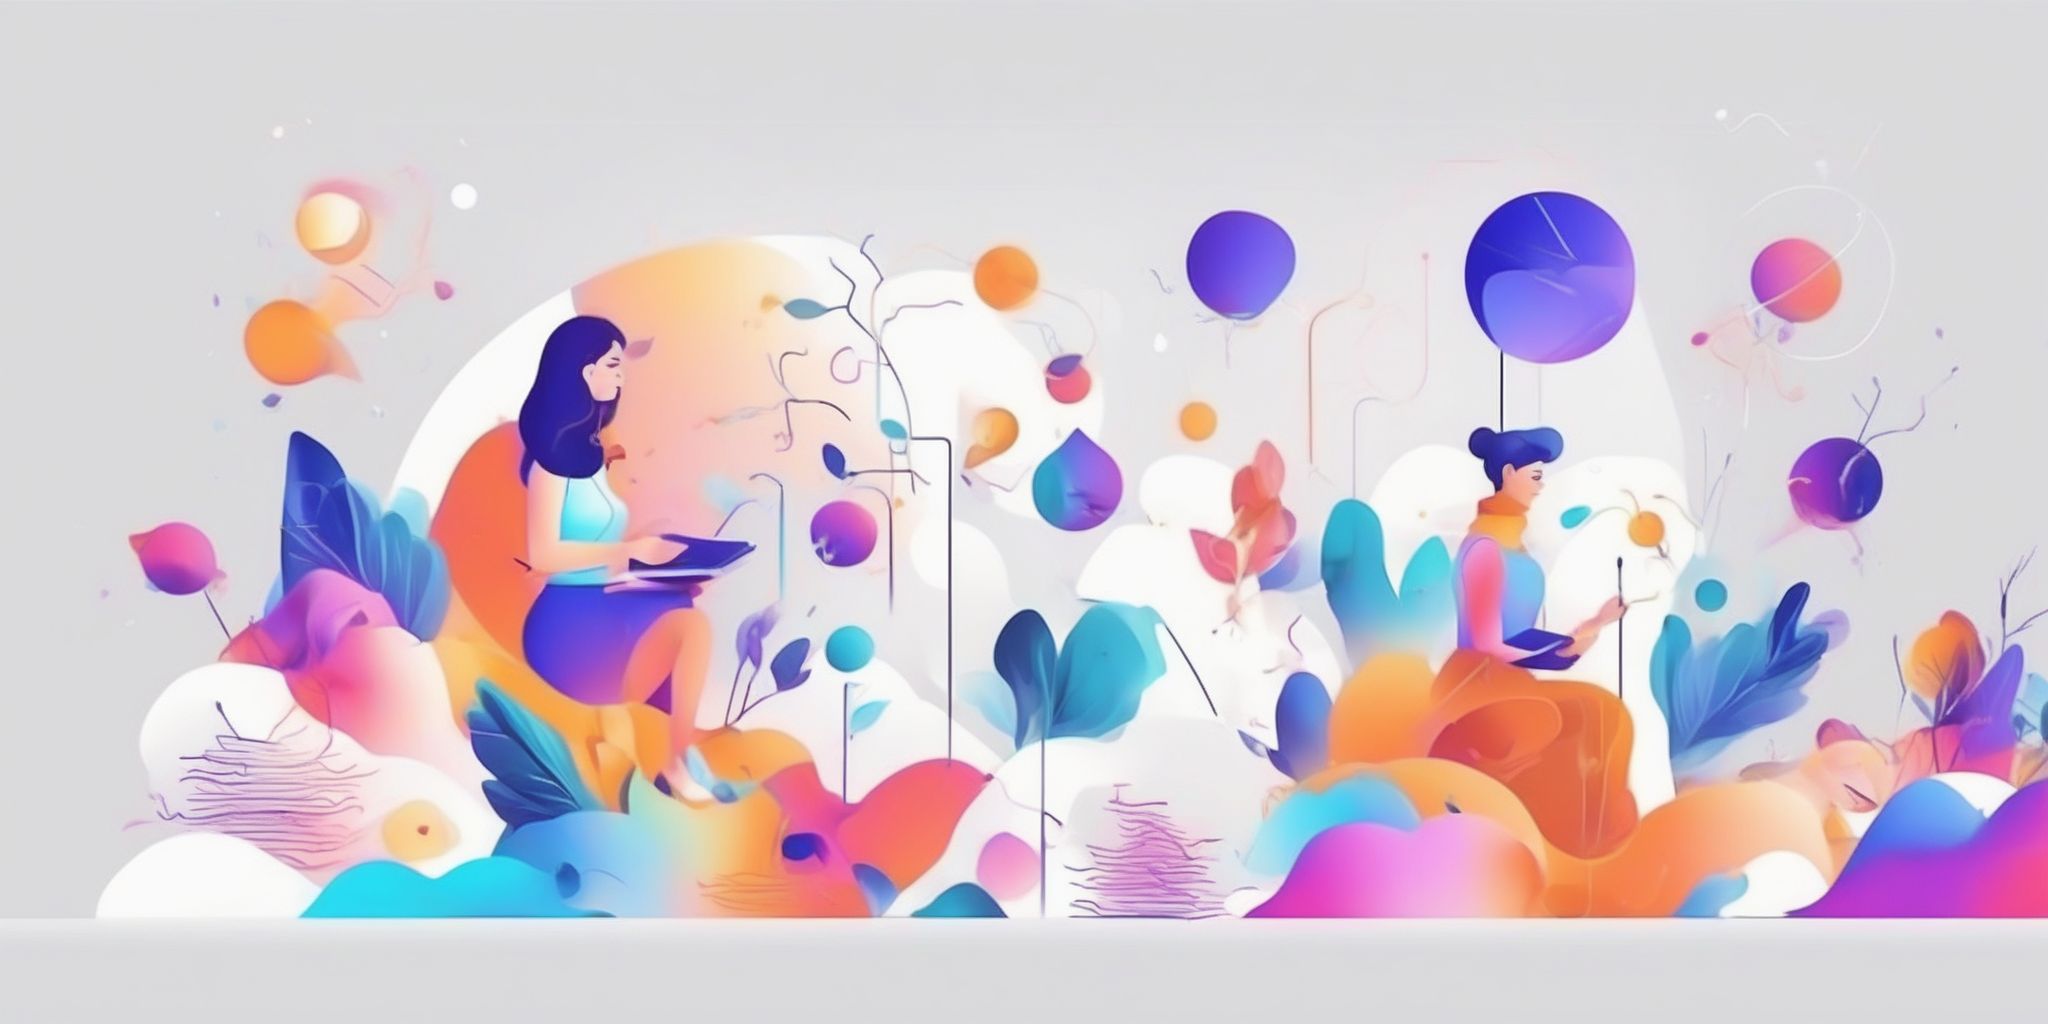 Creative thinking in illustration style with gradients and white background